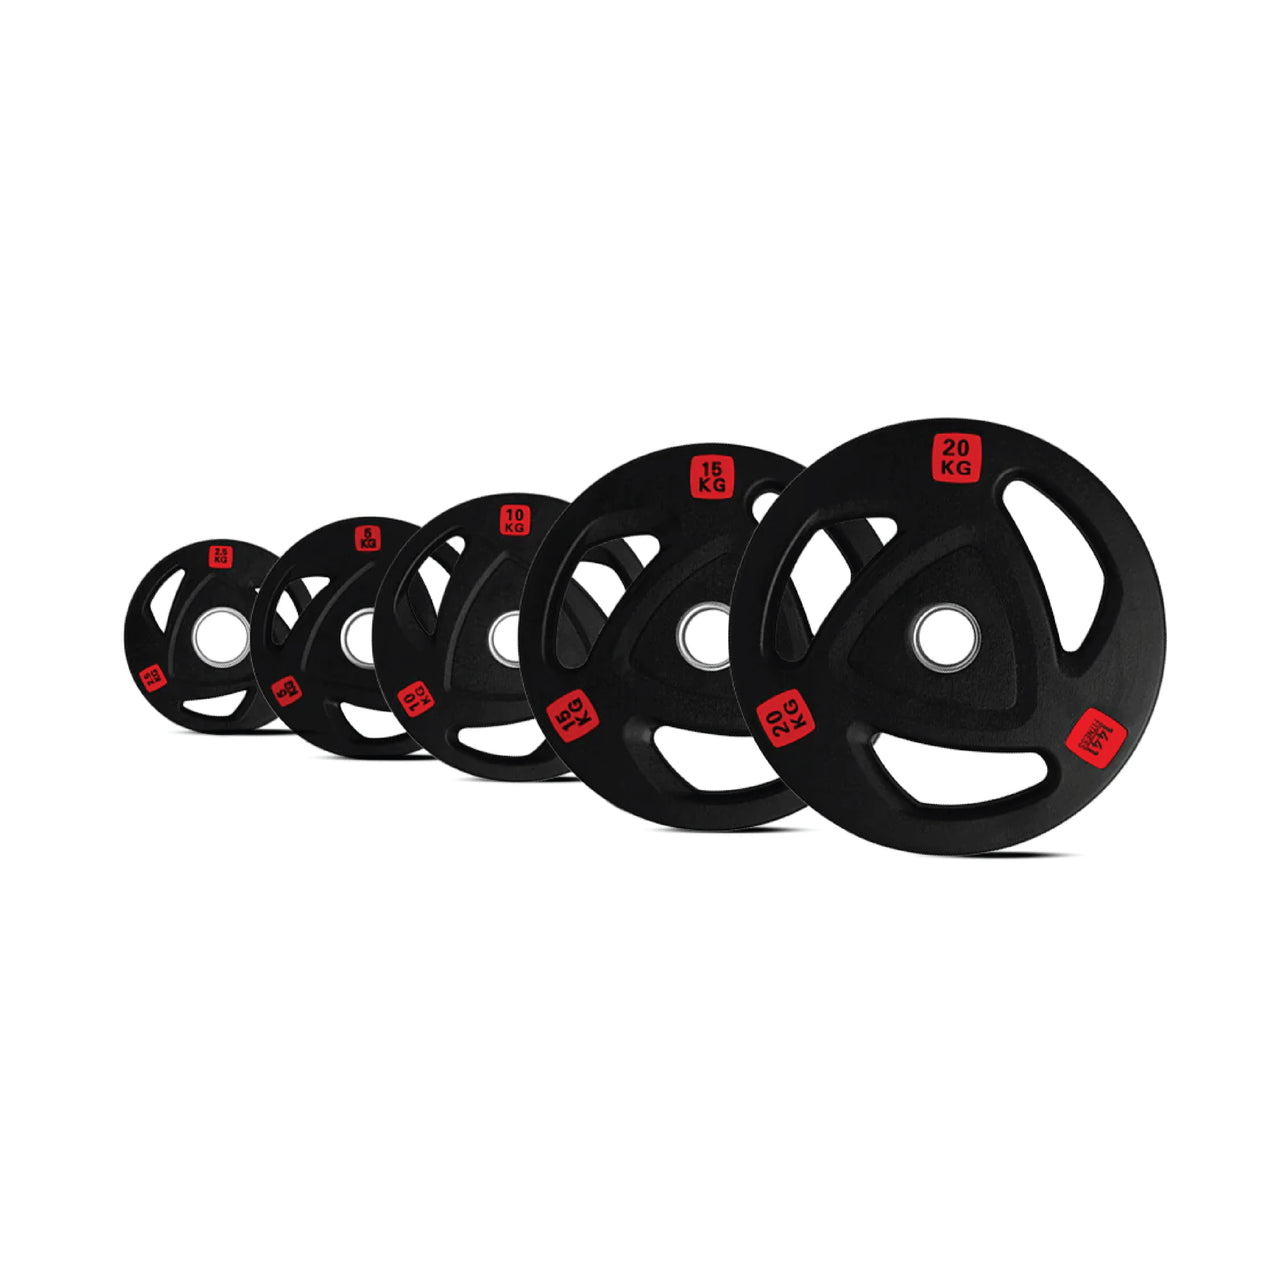 1441 Fitness Tri-Grip Olympic Rubber Plates 2.5 Kg to 20 Kg